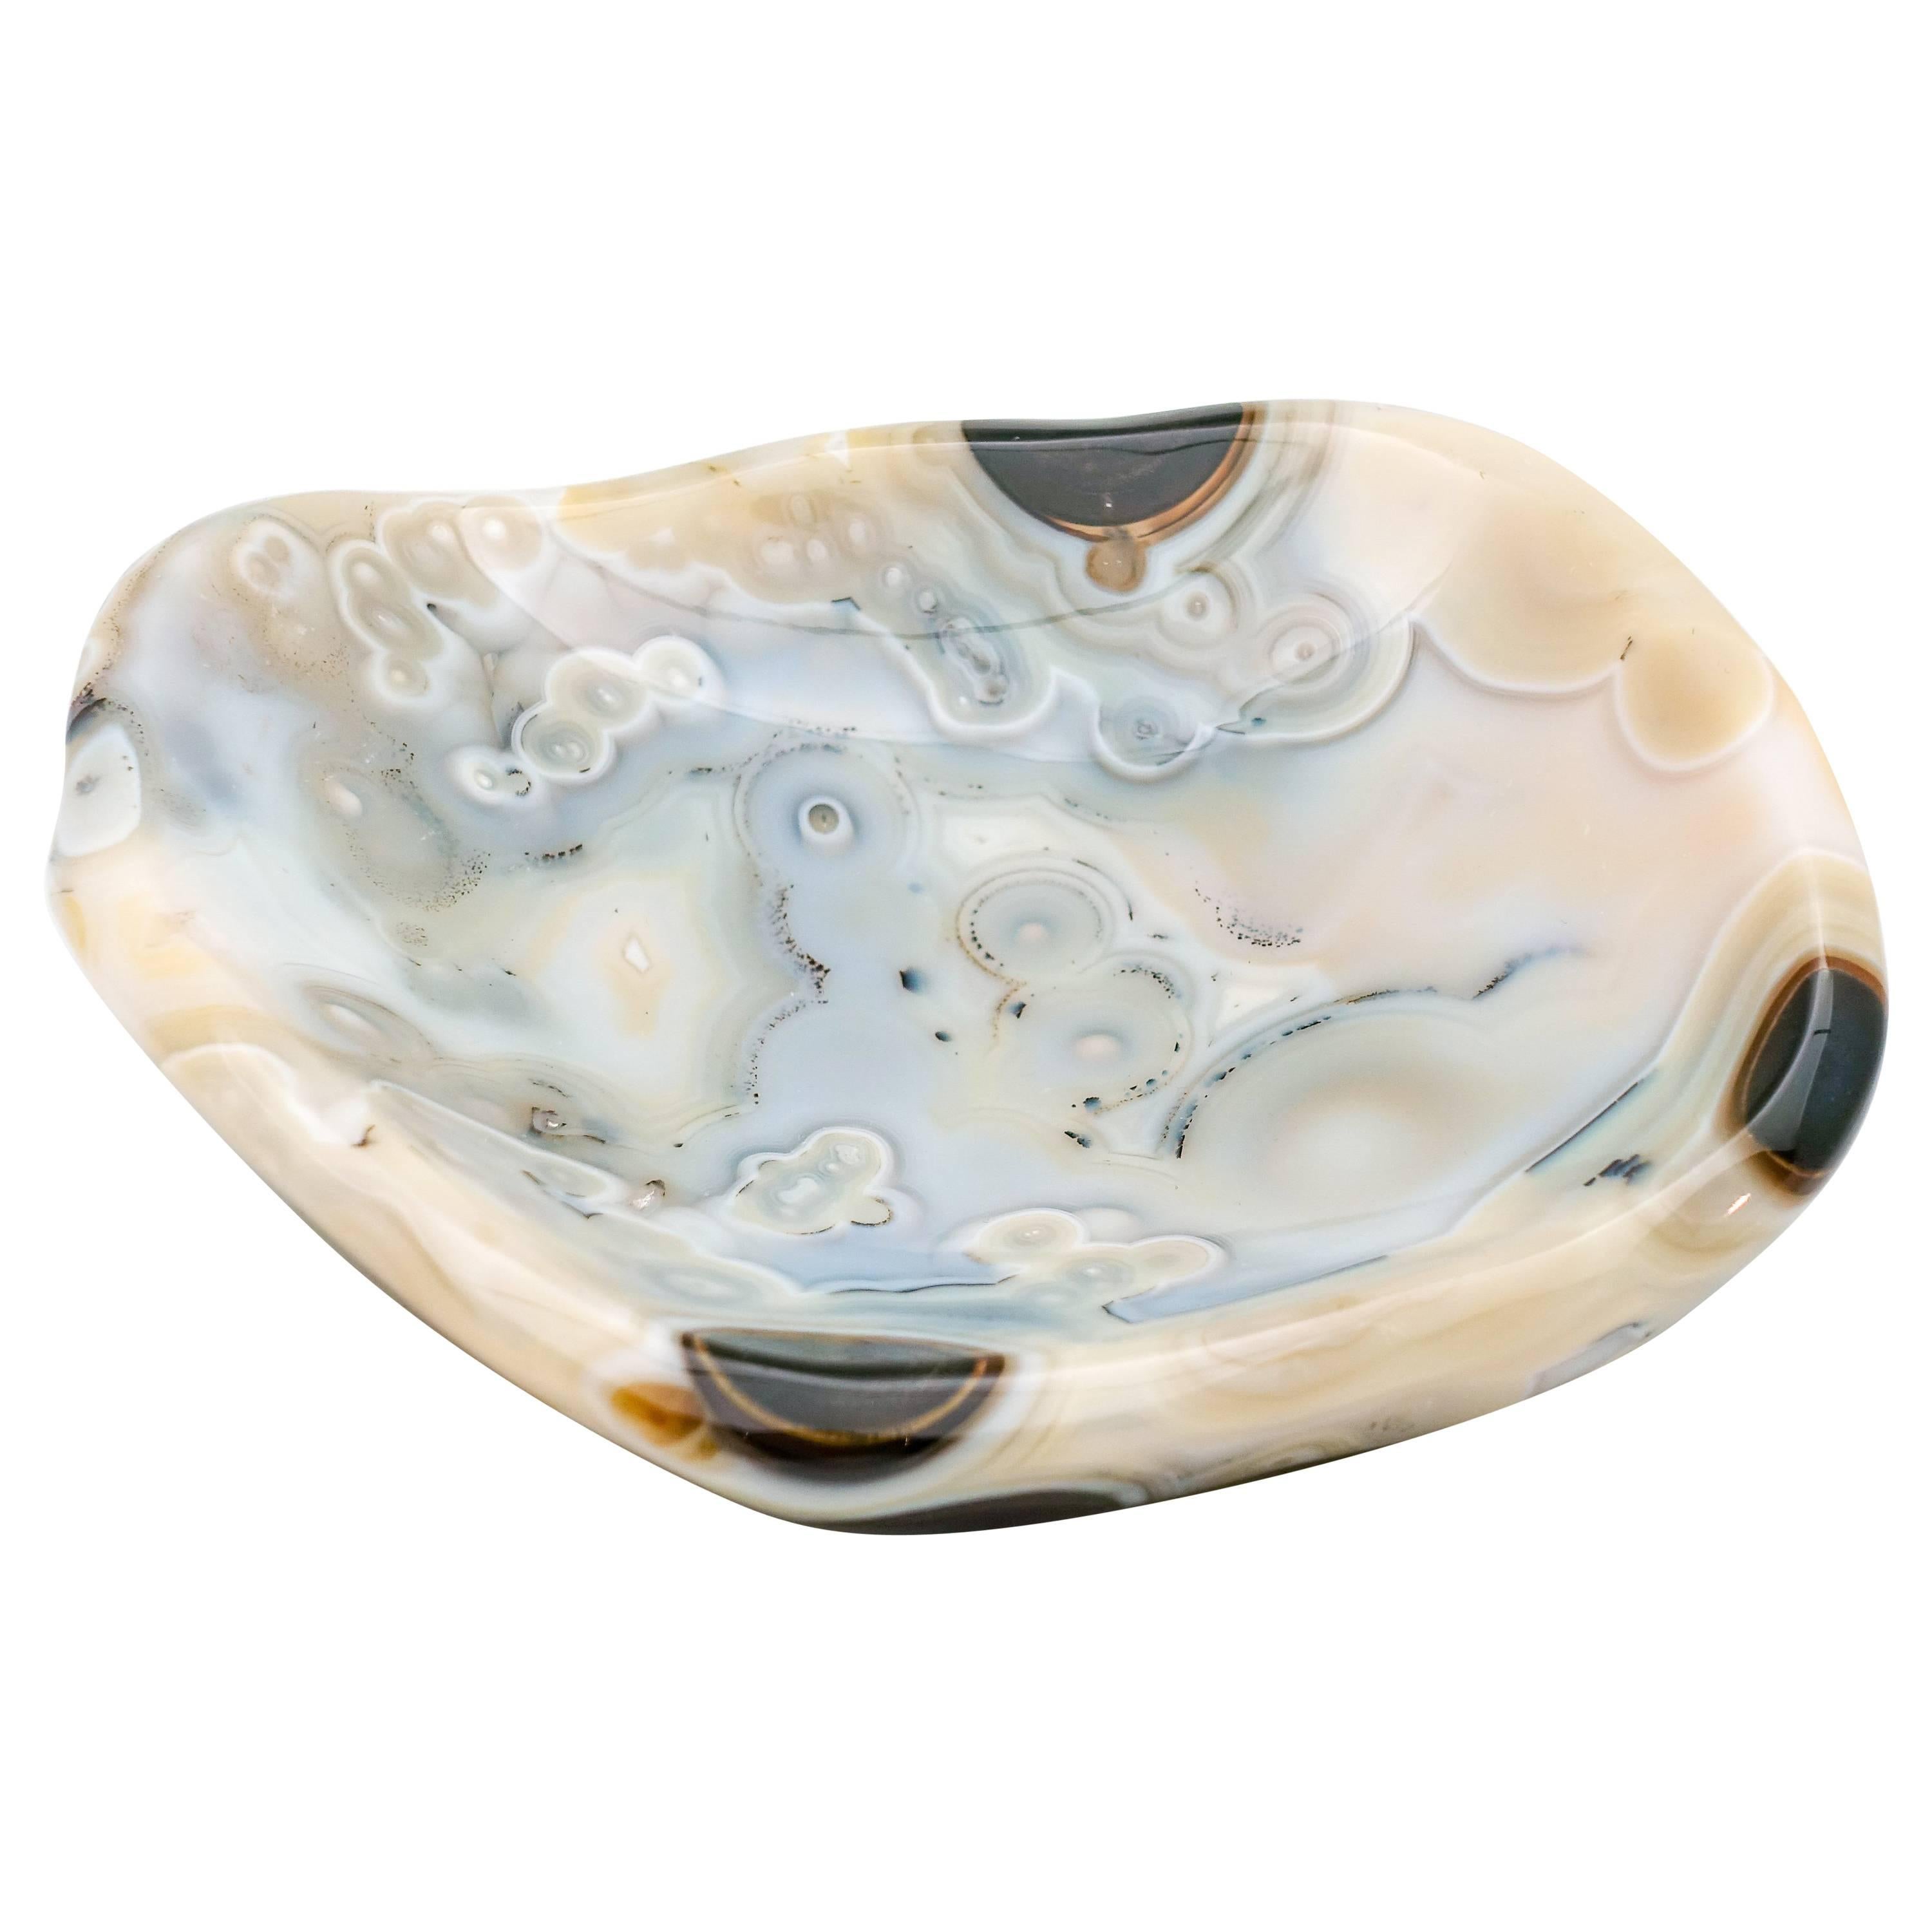 Agate Vide Poche Bowl, Rare and Large in Size, Hand-Carved in Madagascar